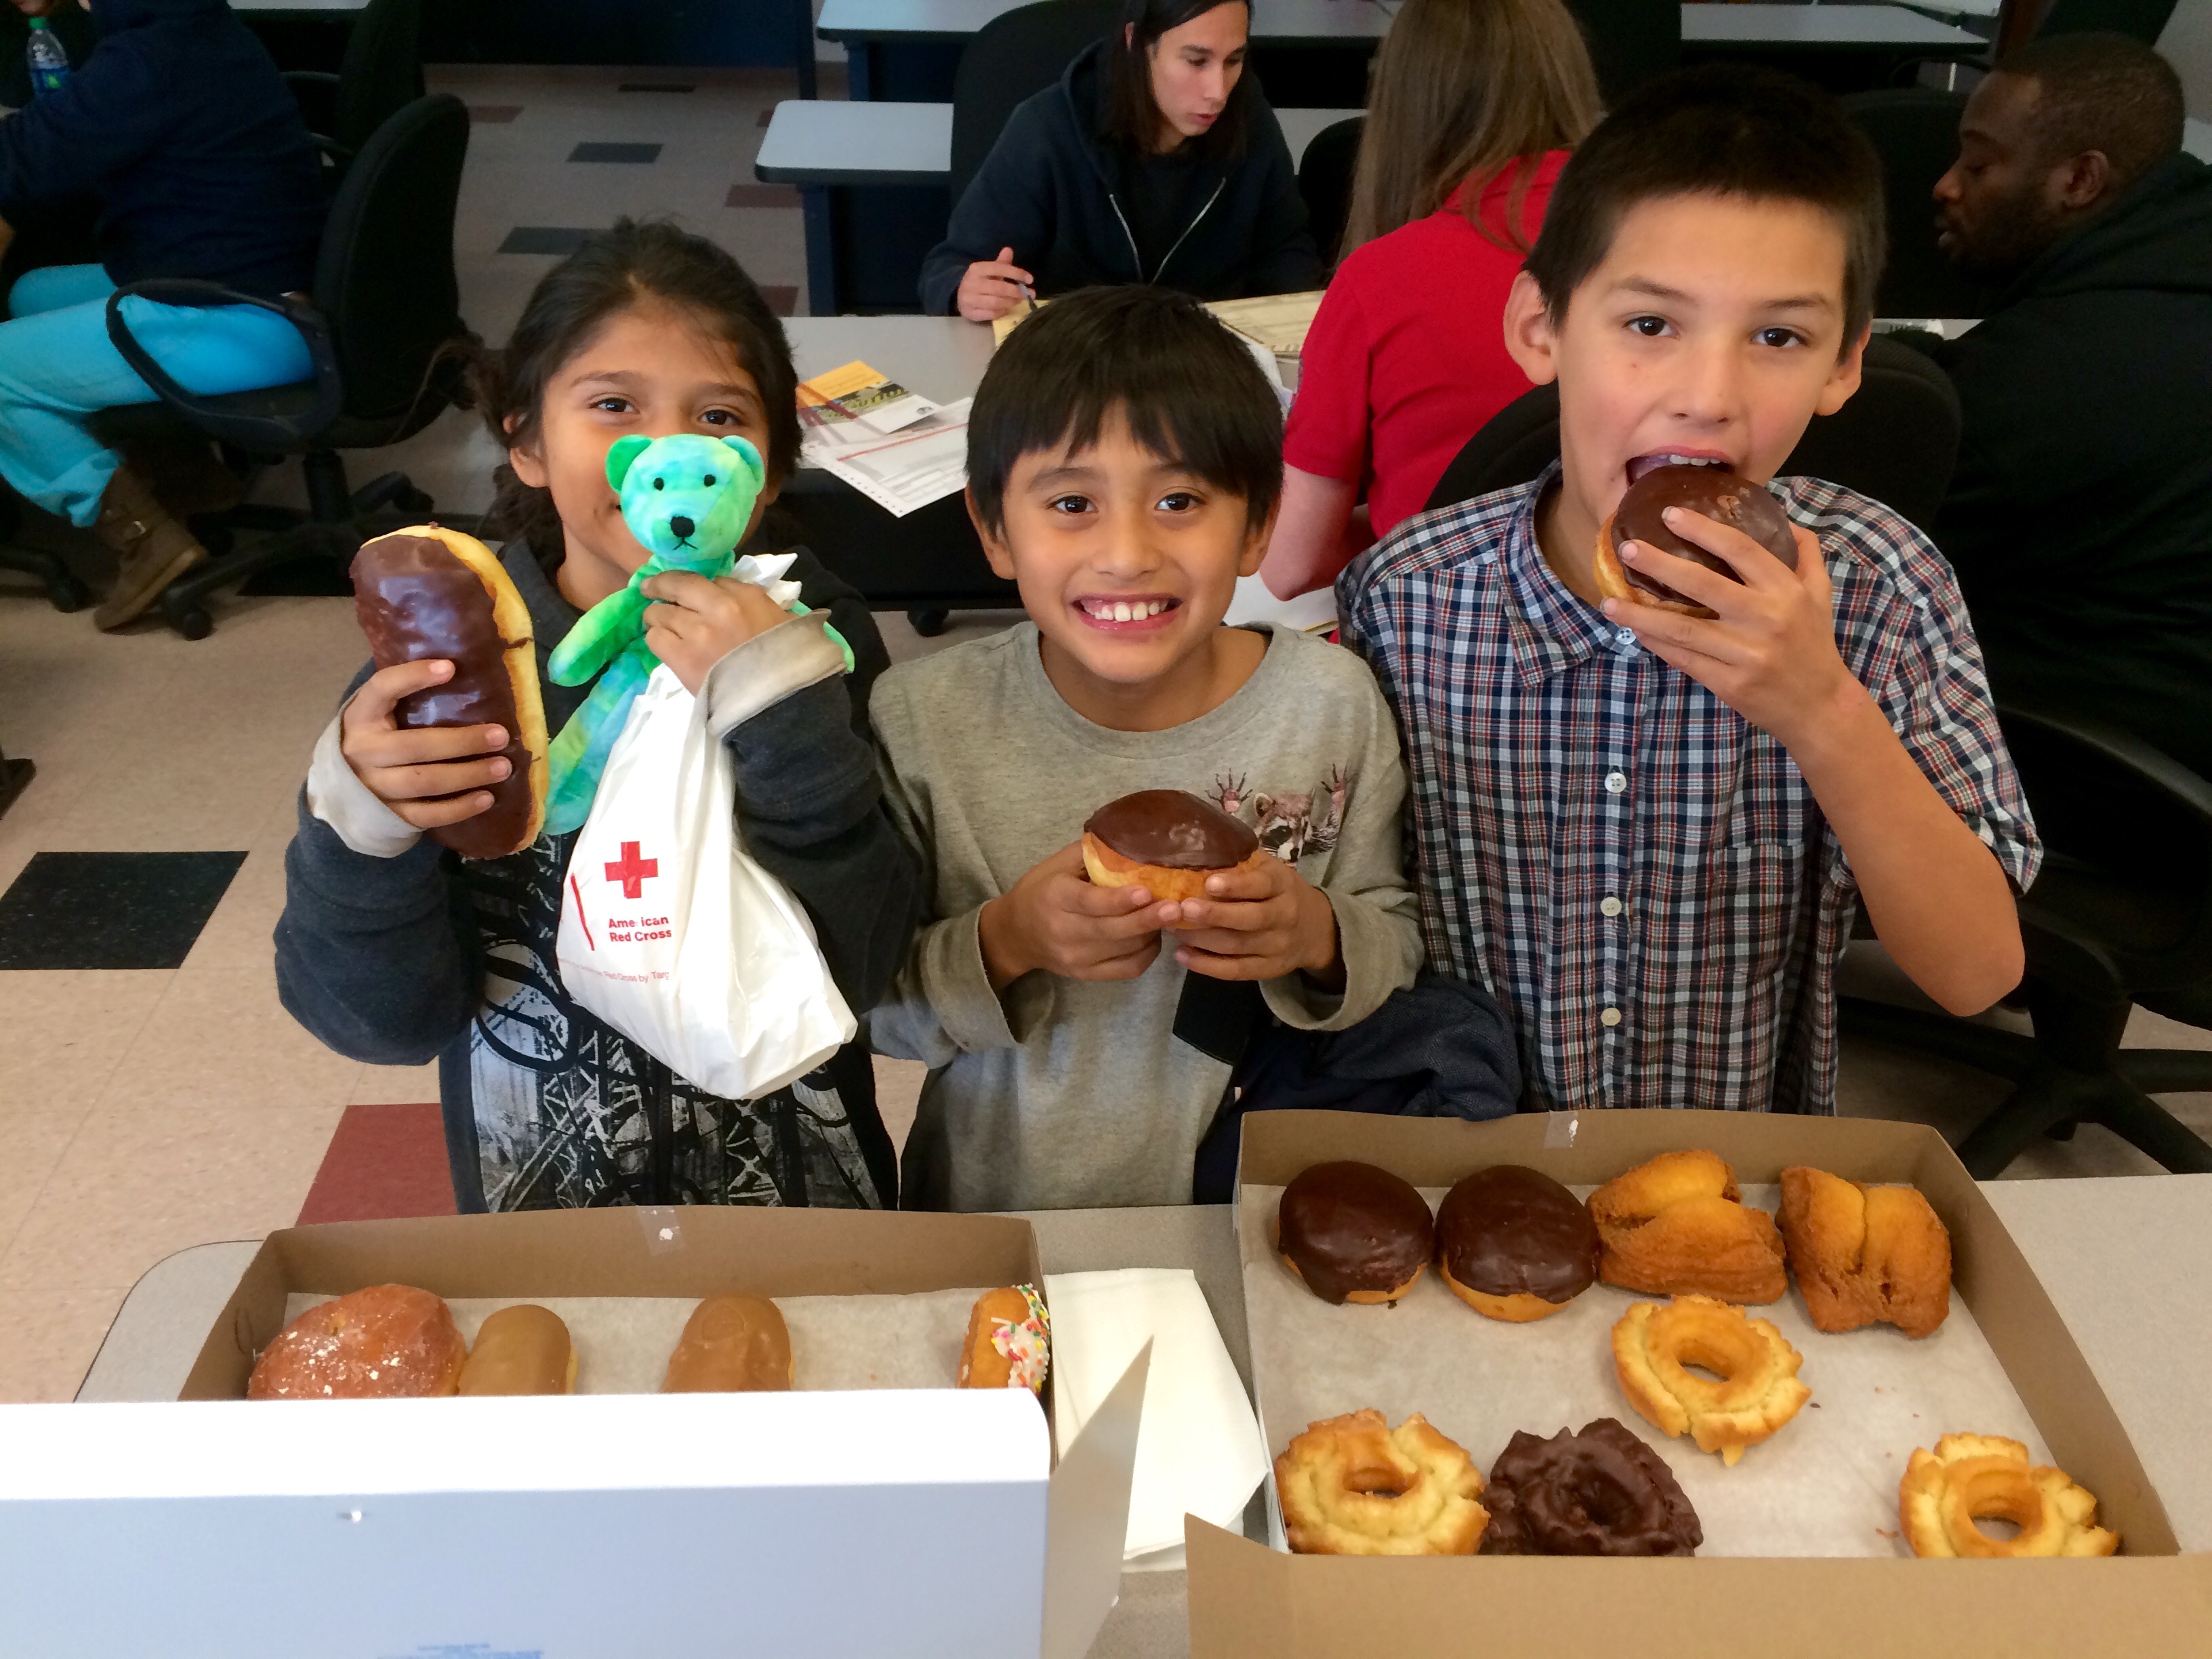 Three smiling children while eating donuts.